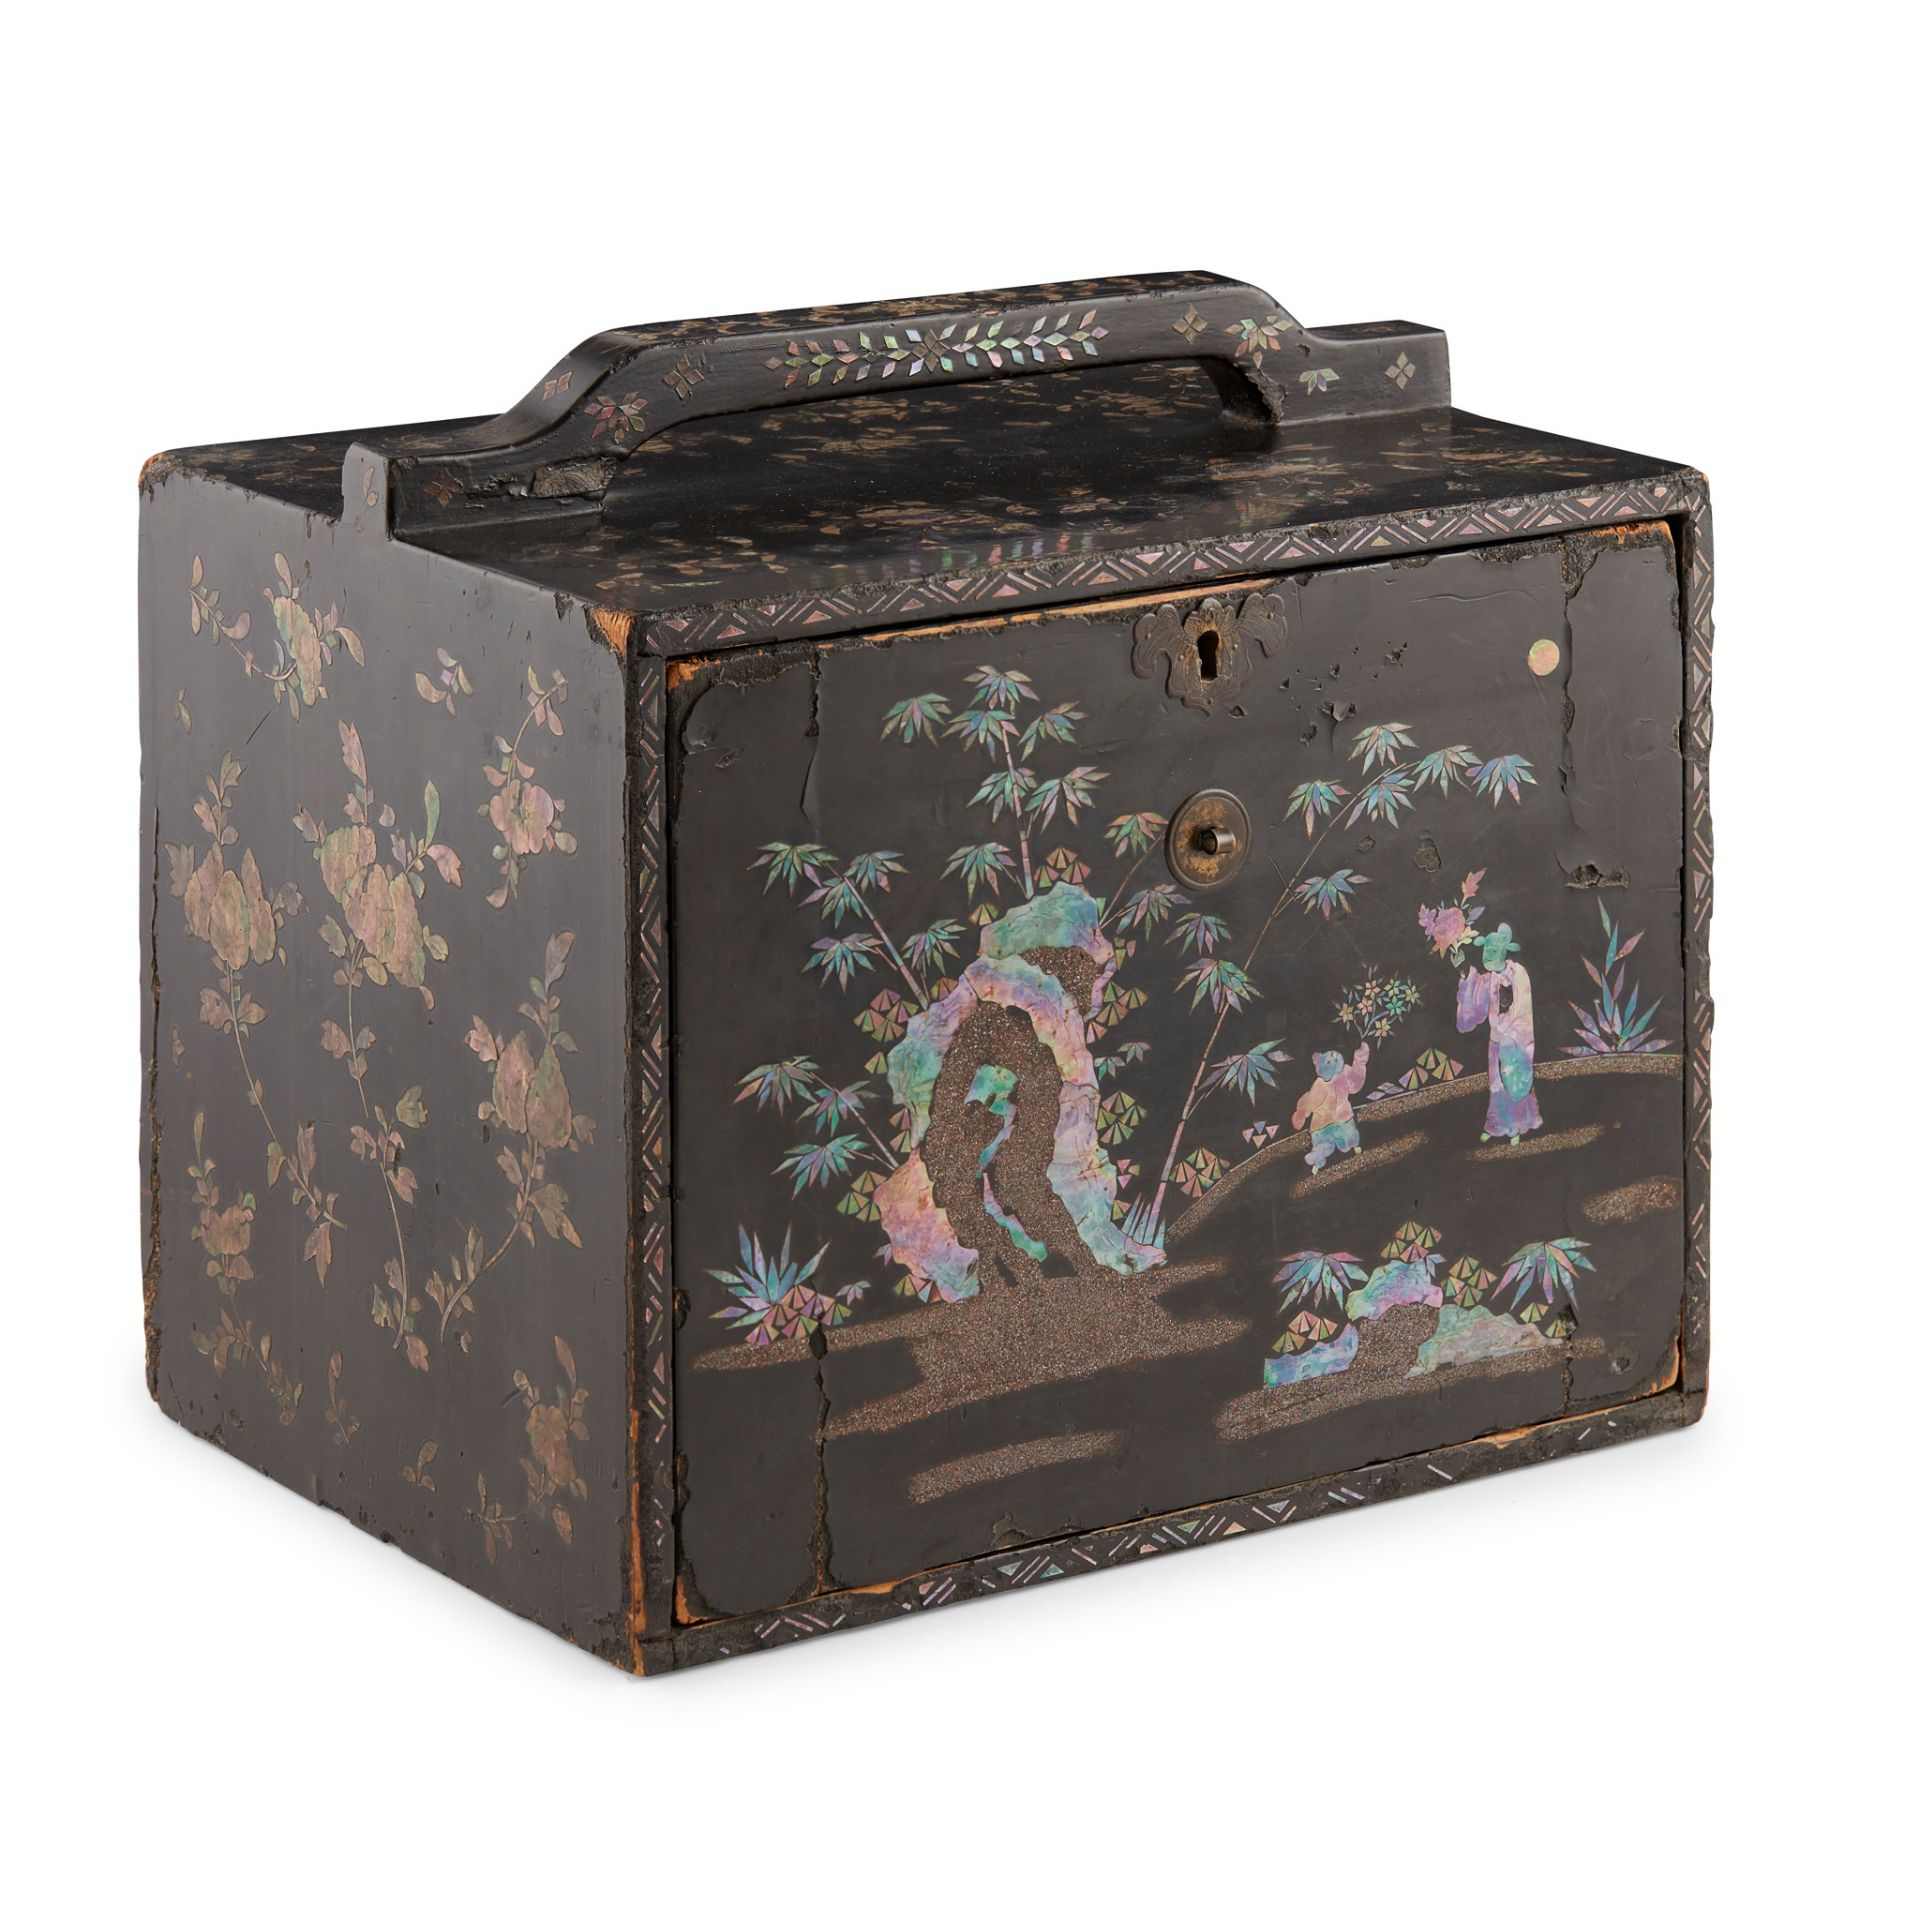 MOTHER-OF-PEARL INLAID BLACK LACQUER CHEST LATE QING DYNASTY-REPUBLIC PERIOD, 19TH-20TH CENTURY